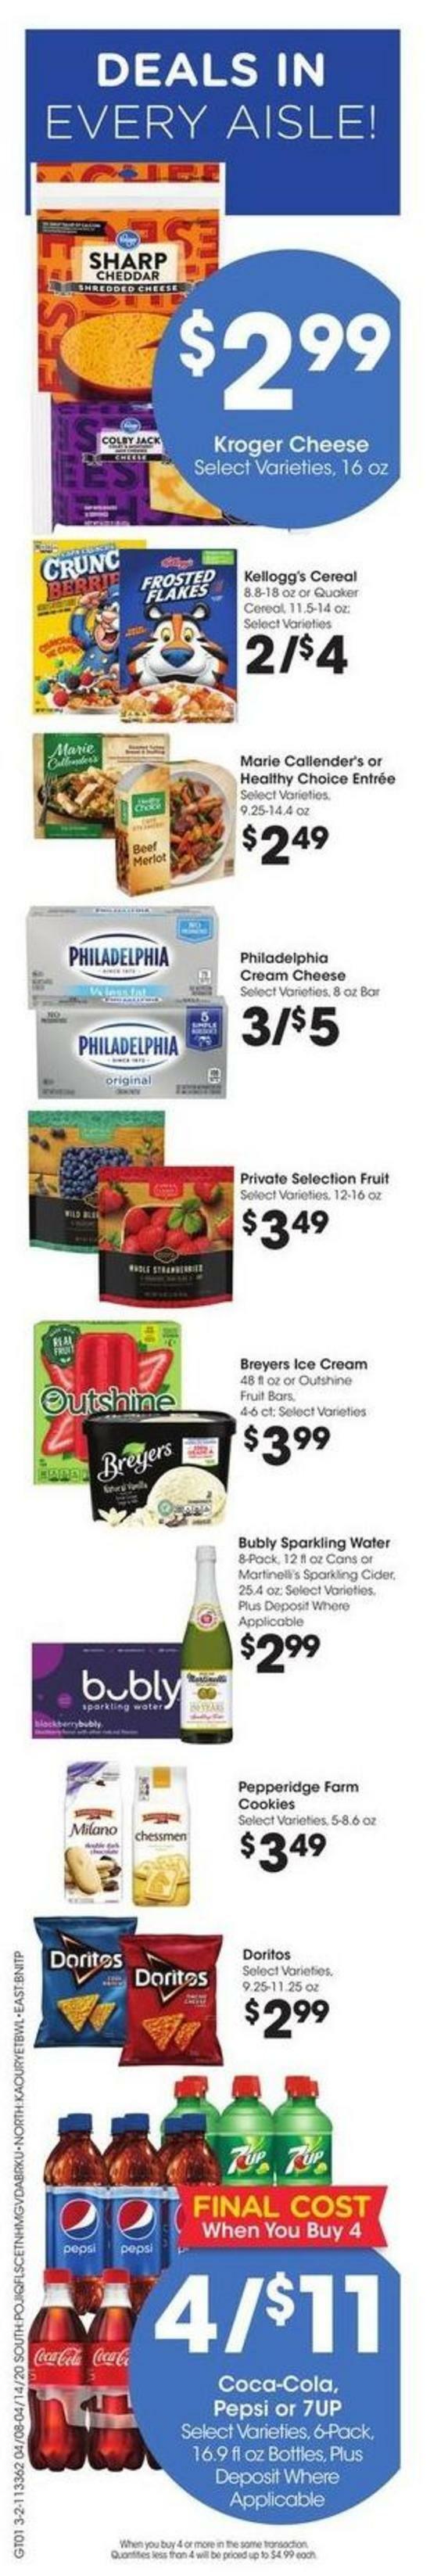 Fred Meyer Weekly Ad from April 8